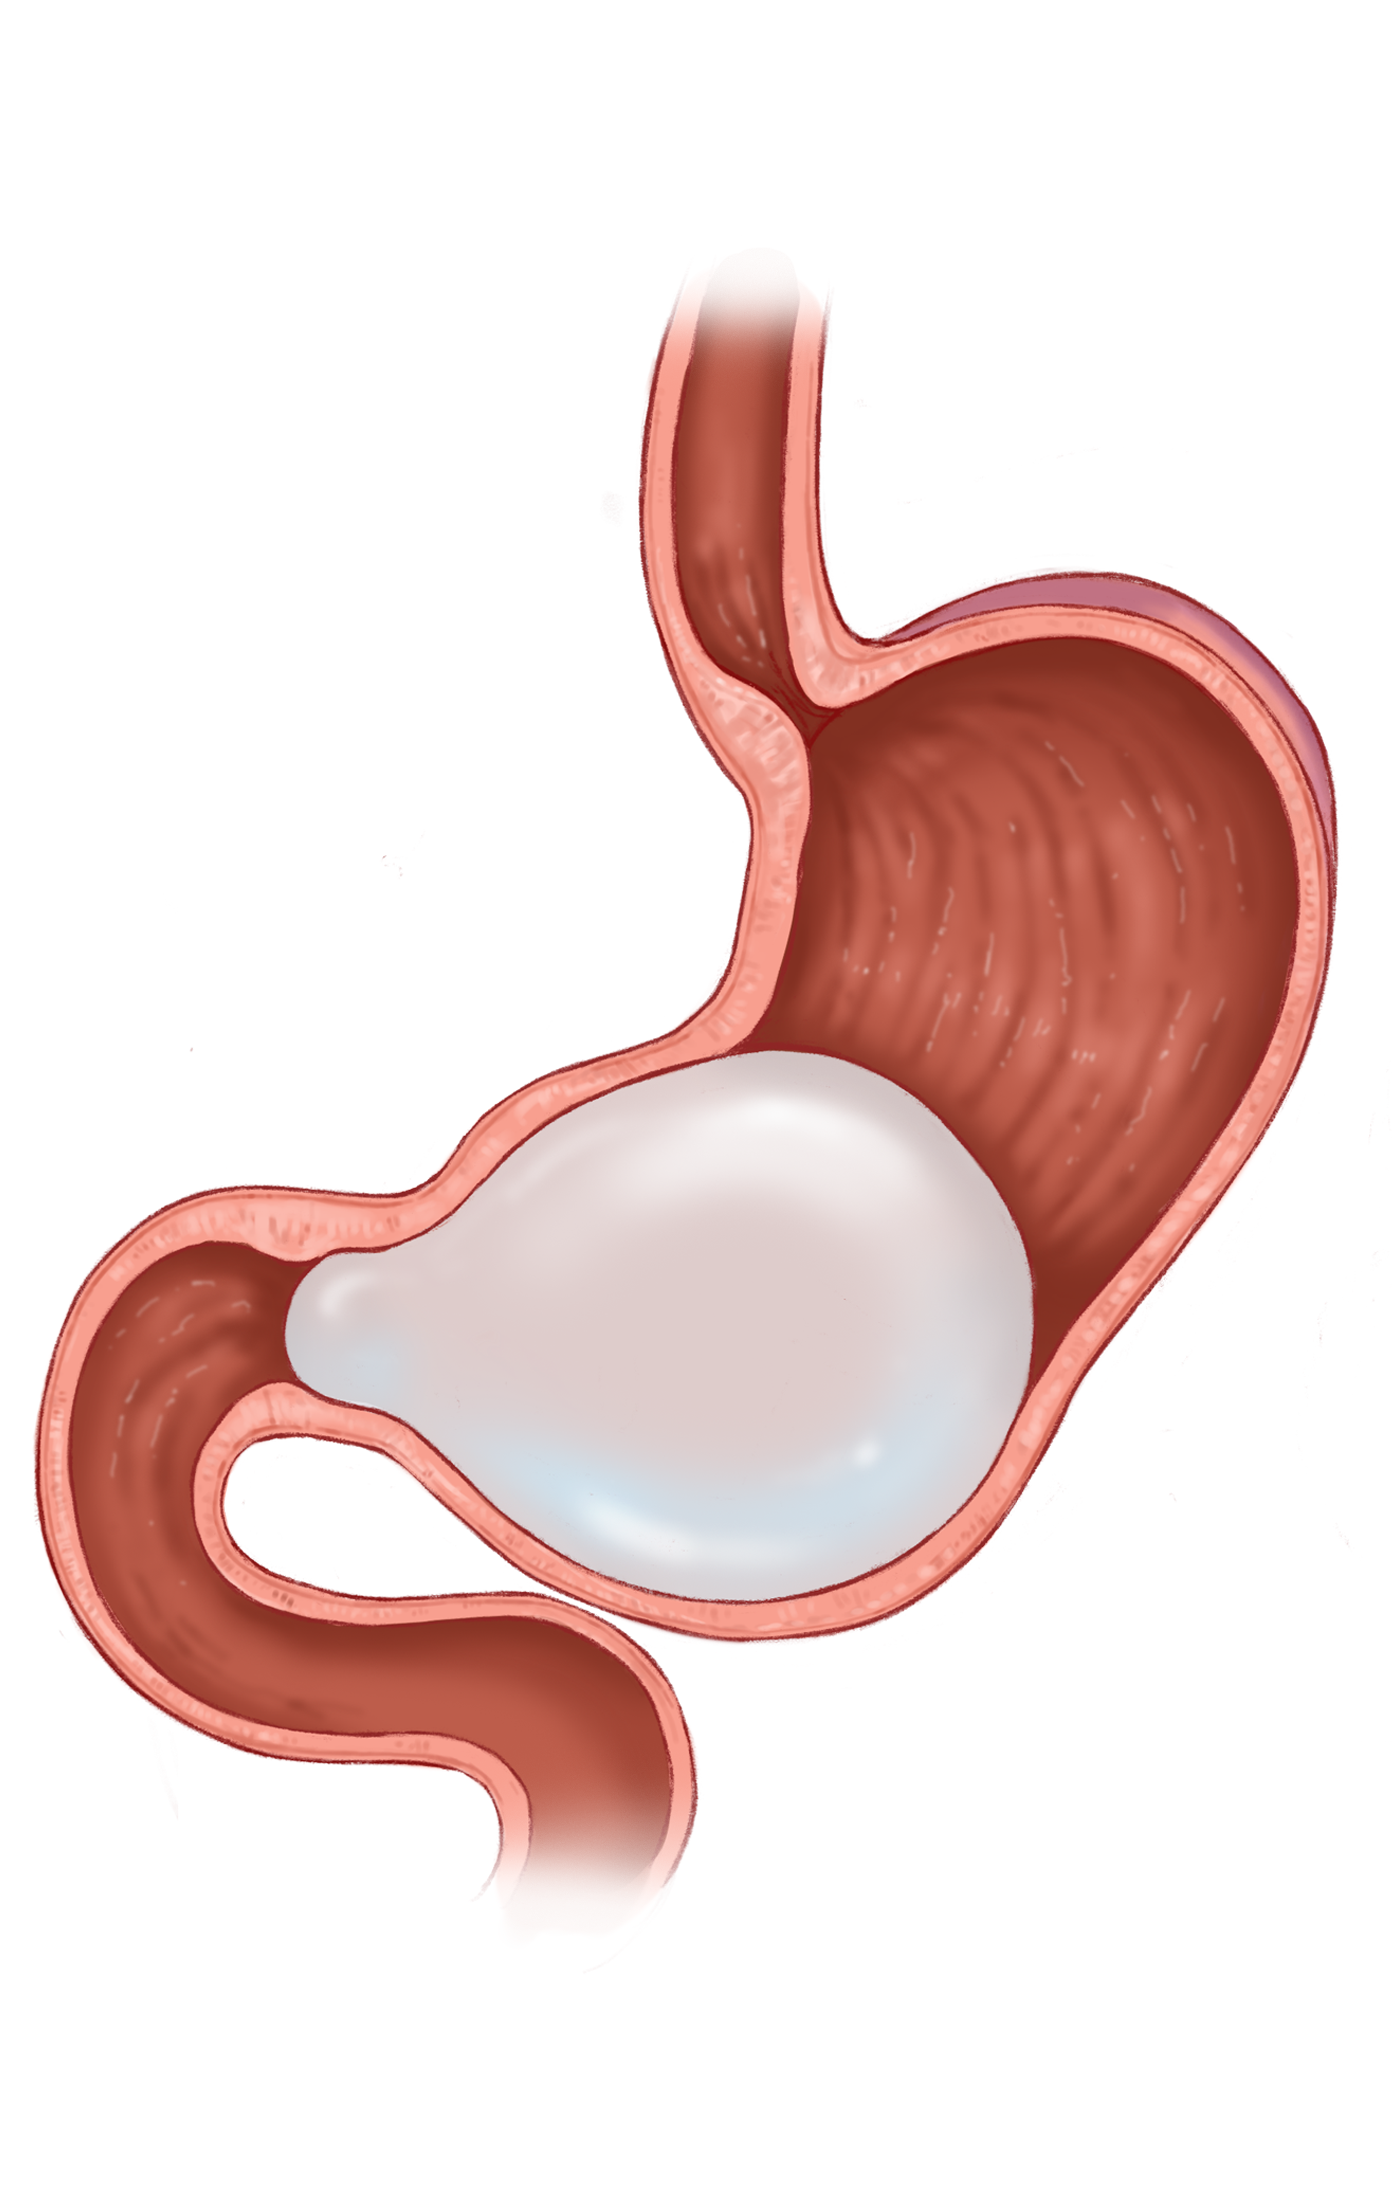 Intragastric Balloon Therapy Gastric Obstruction